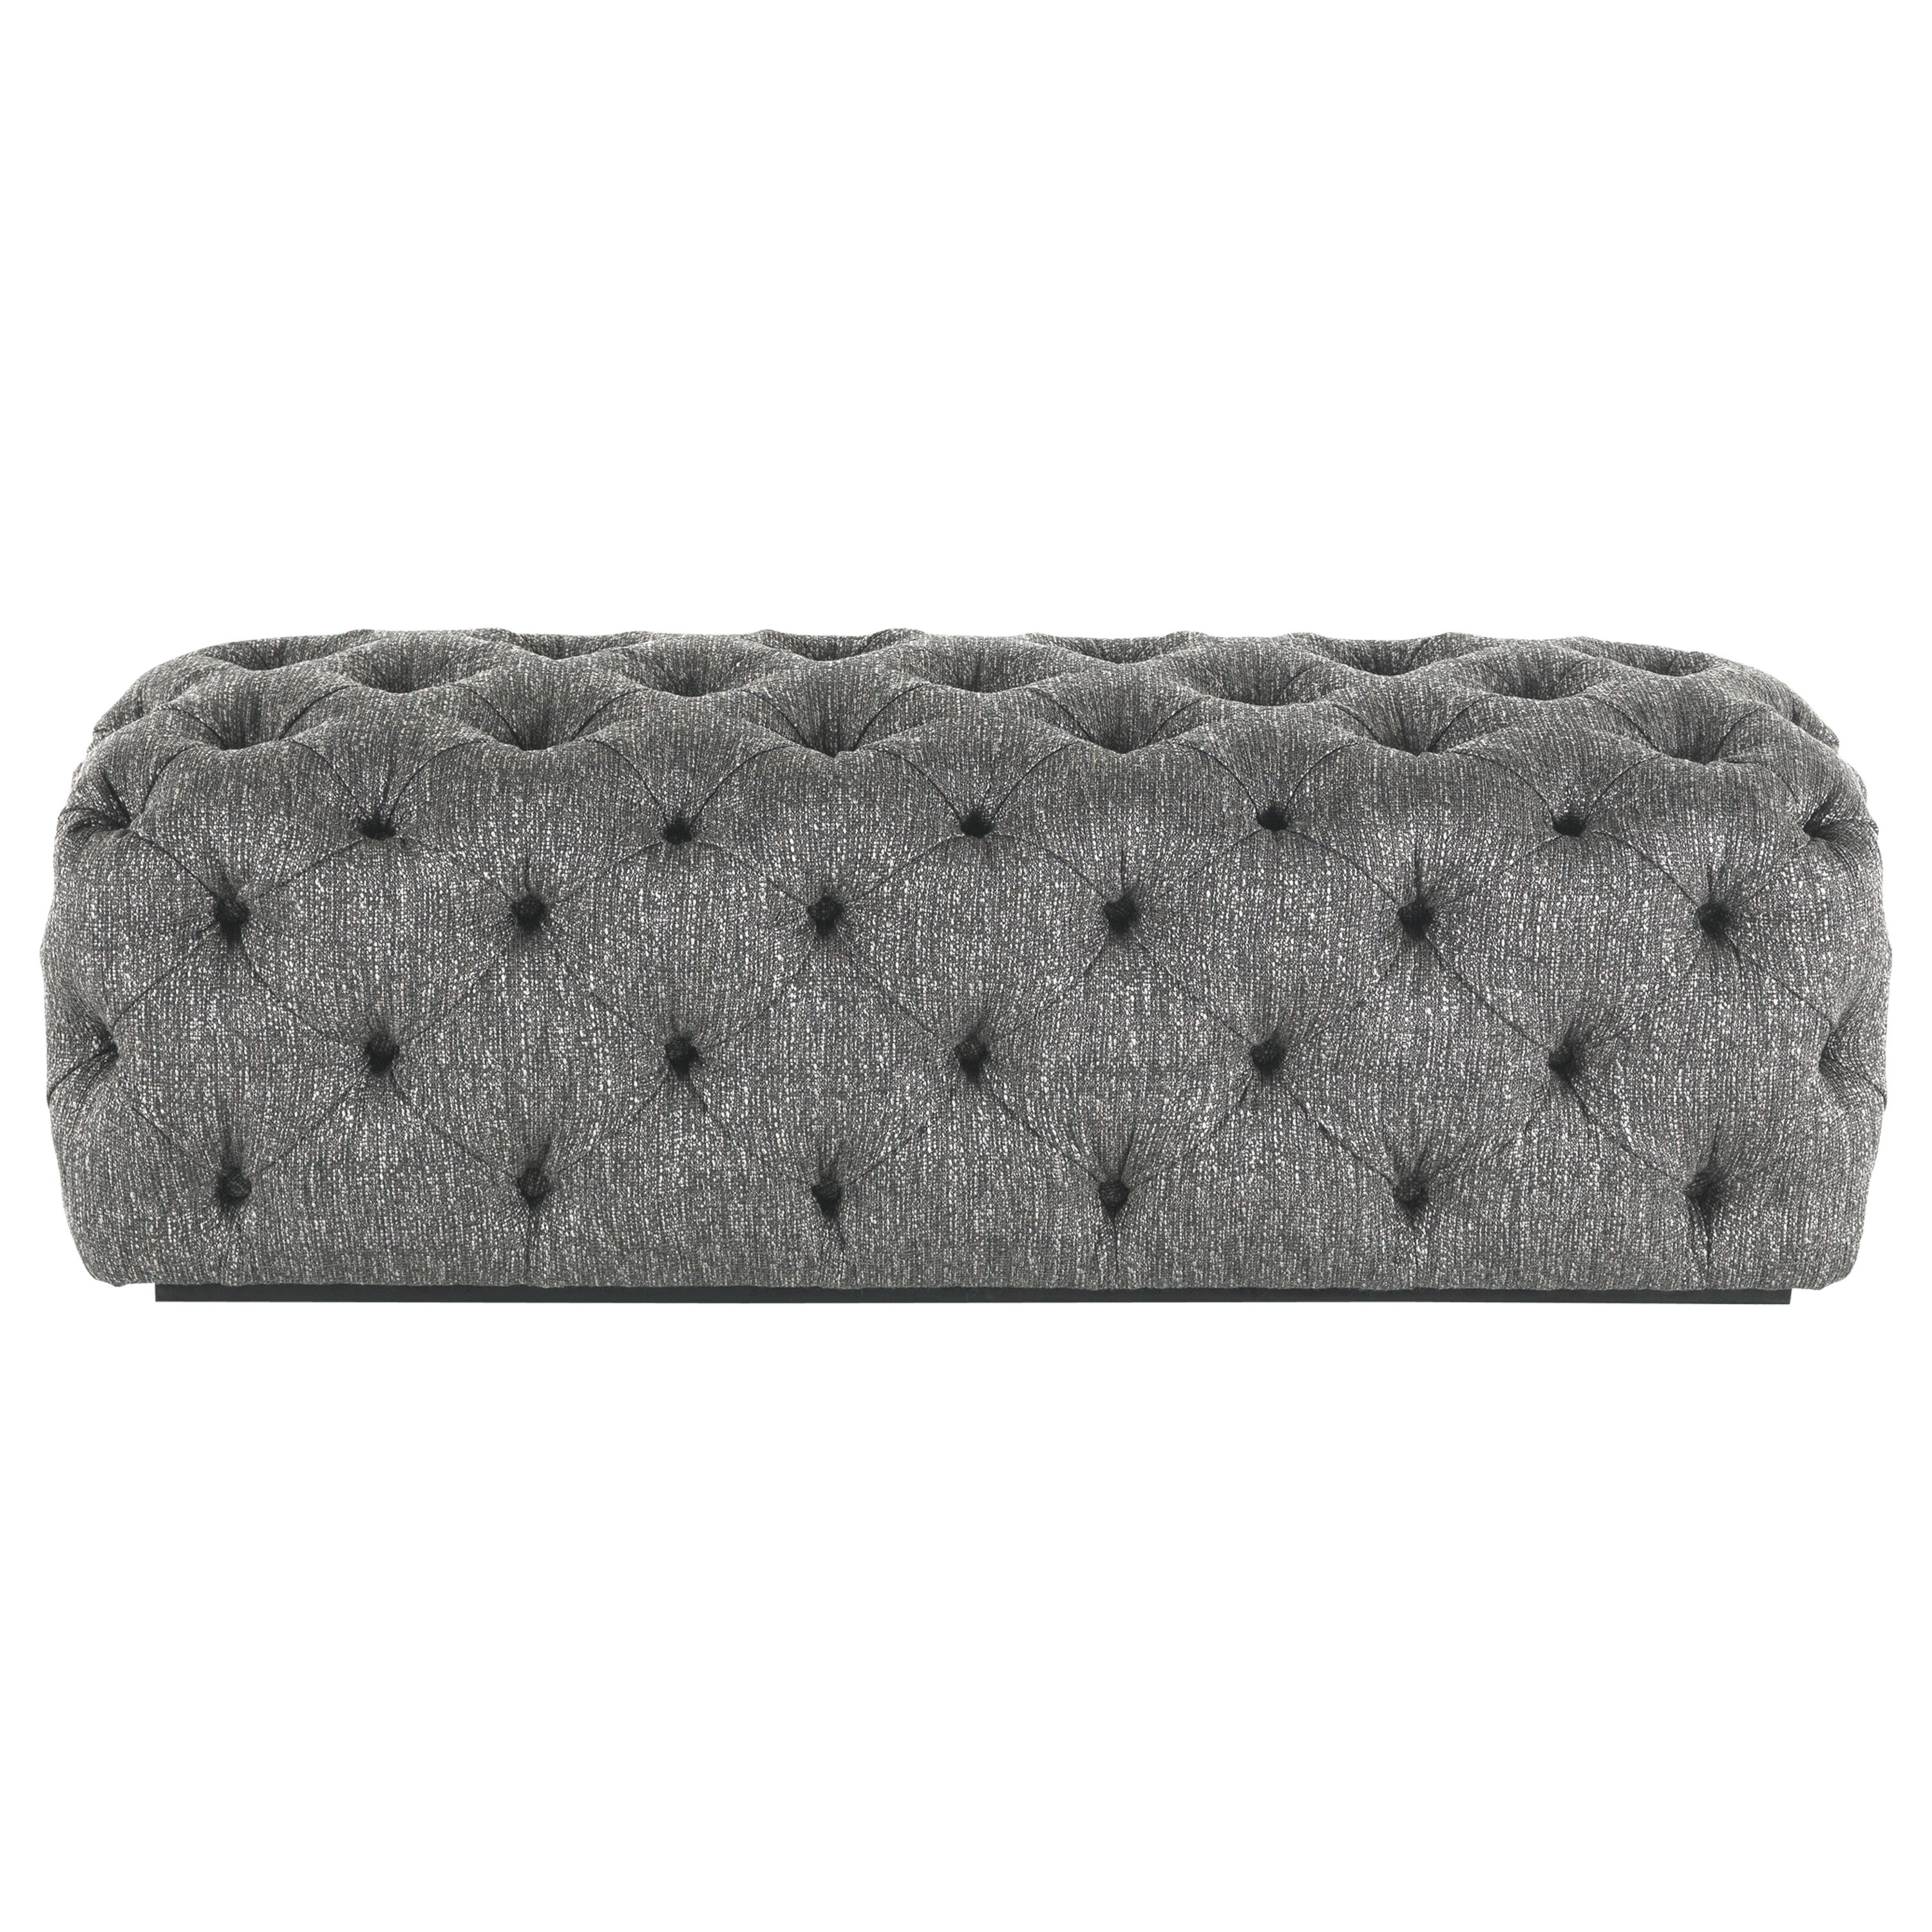 21st Century King's Cross Rectangular Pouf in Fabric by Gianfranco Ferré Home